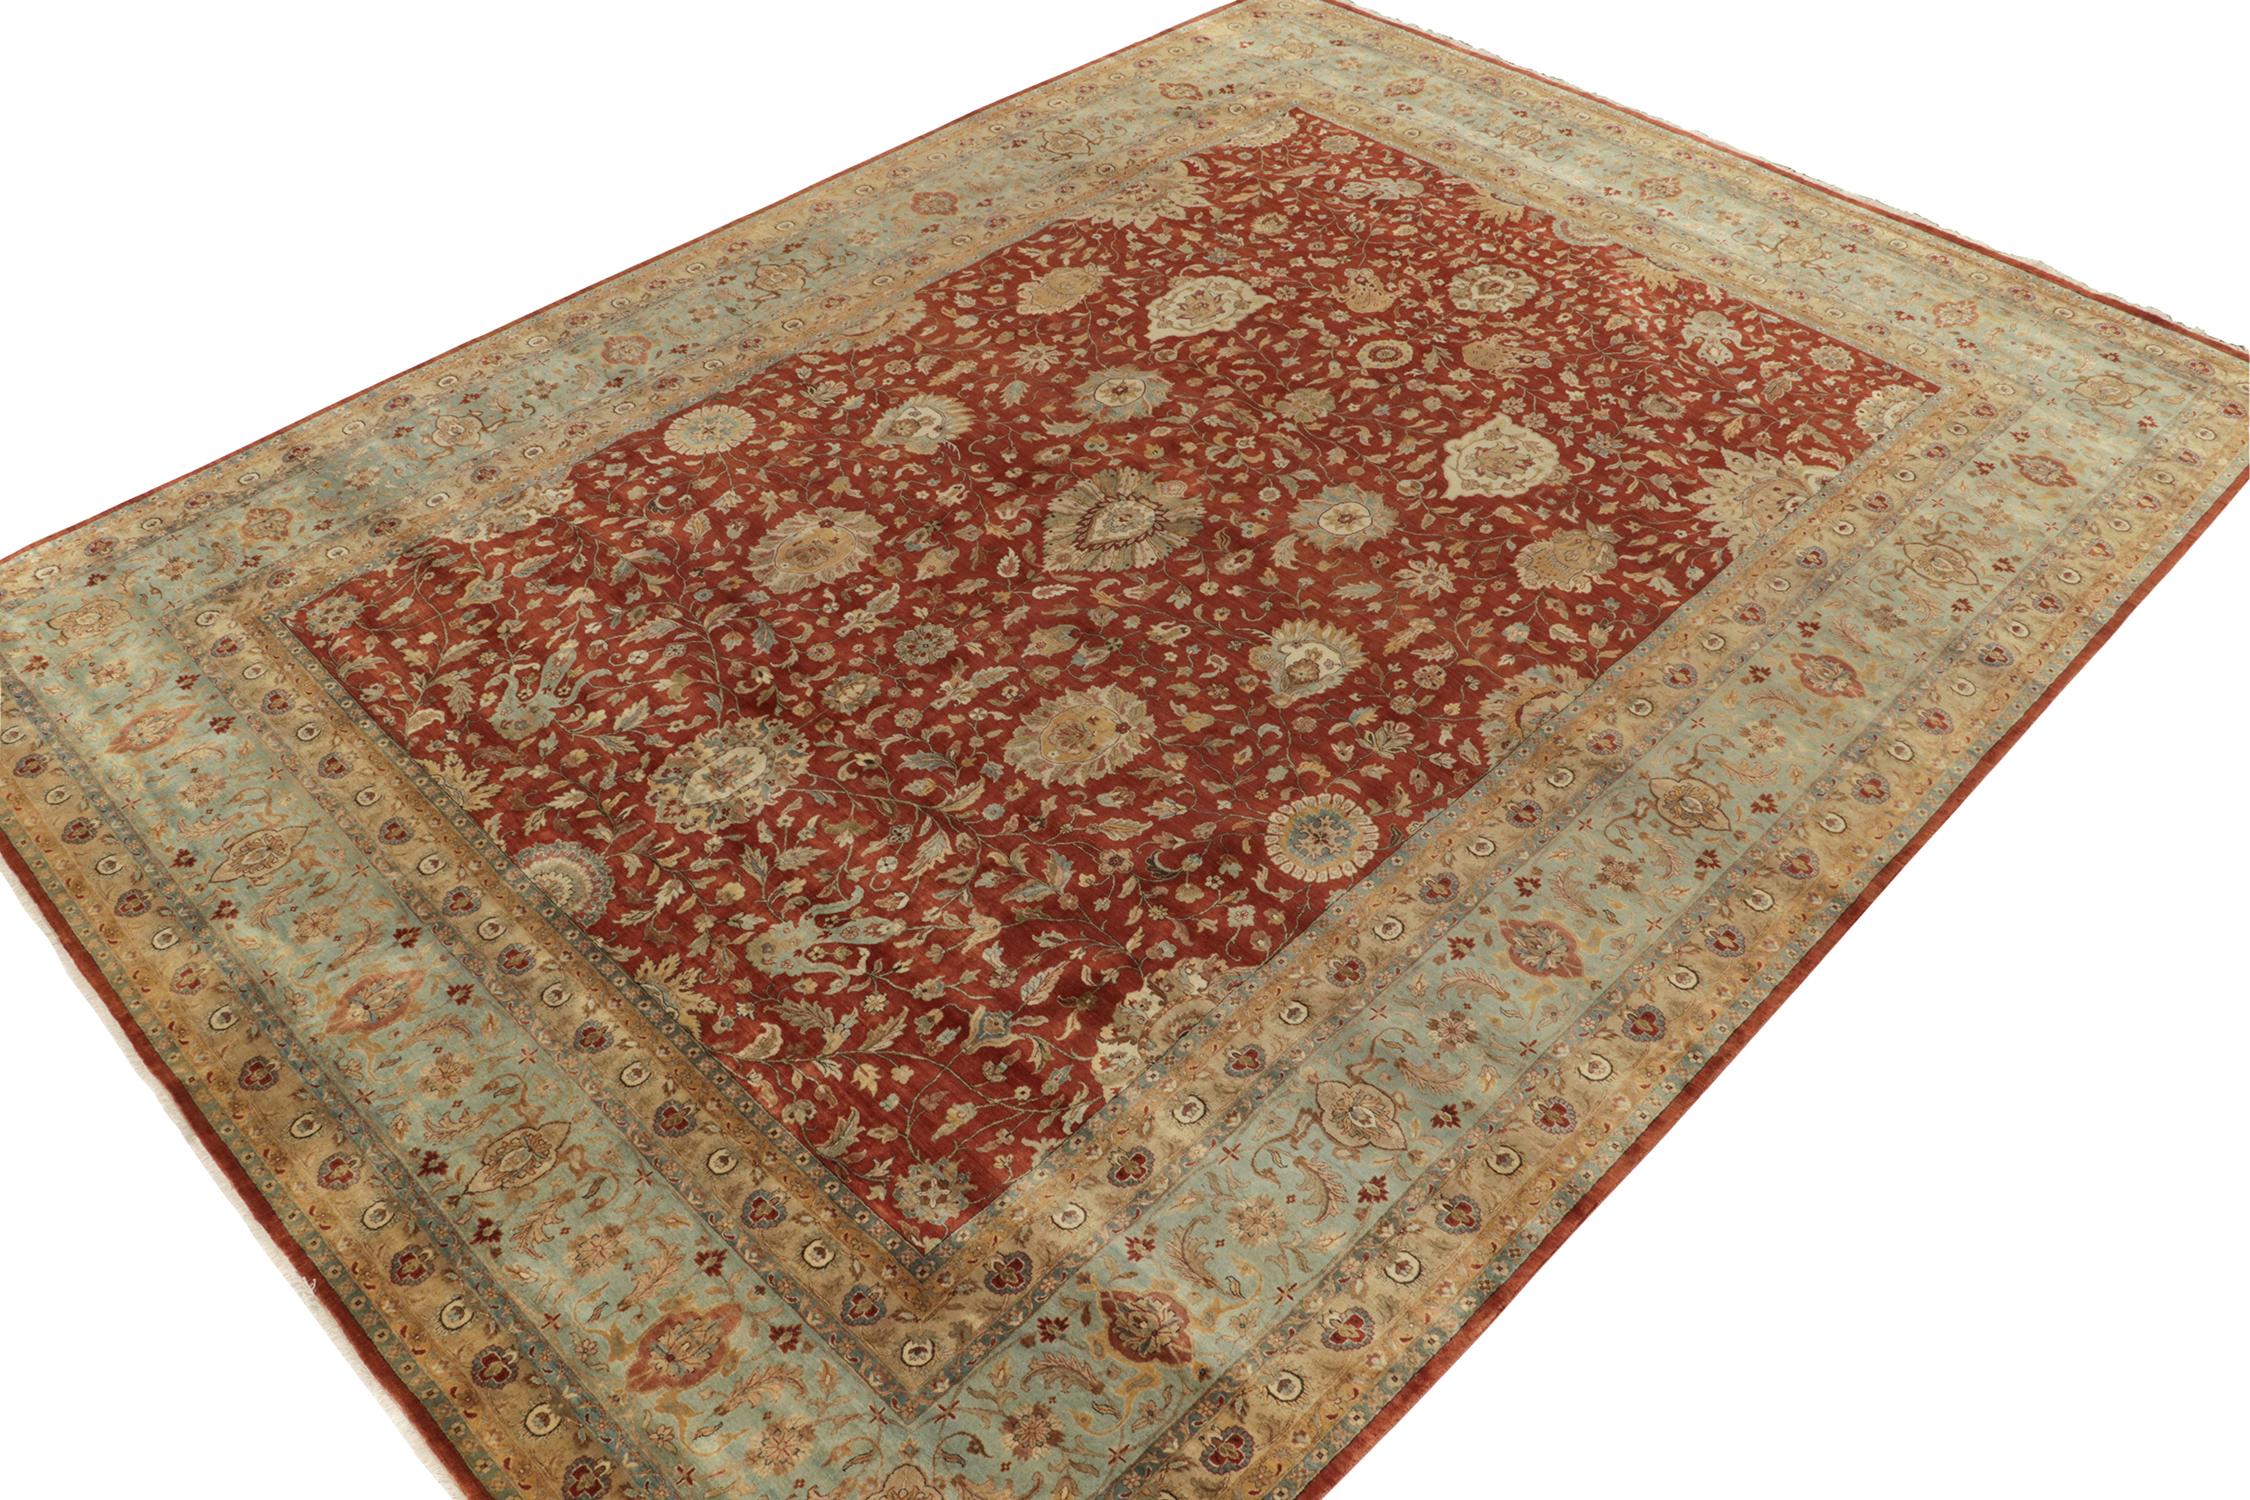 Hand-knotted in wool, this 12x16 contemporary rug from our Modern Classics collection uniquely reimagines antique Persian rug styles.

On the Design: A gracious scale depicts regal floral patterns in gentle beige and blue resting on rust red with